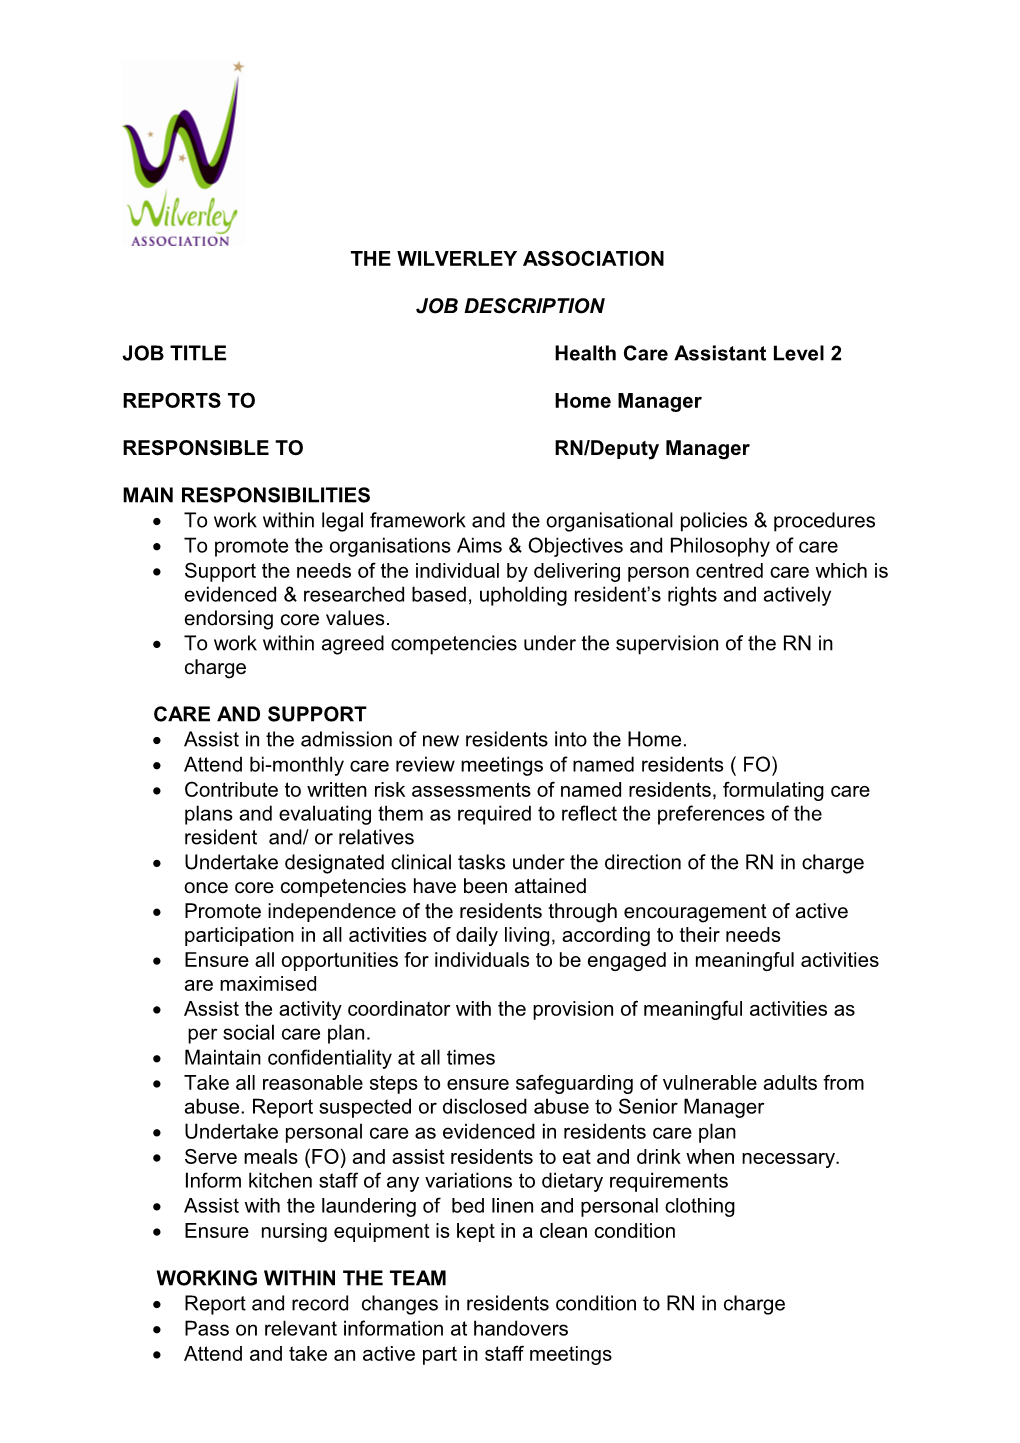 The Wilverley Association Limited